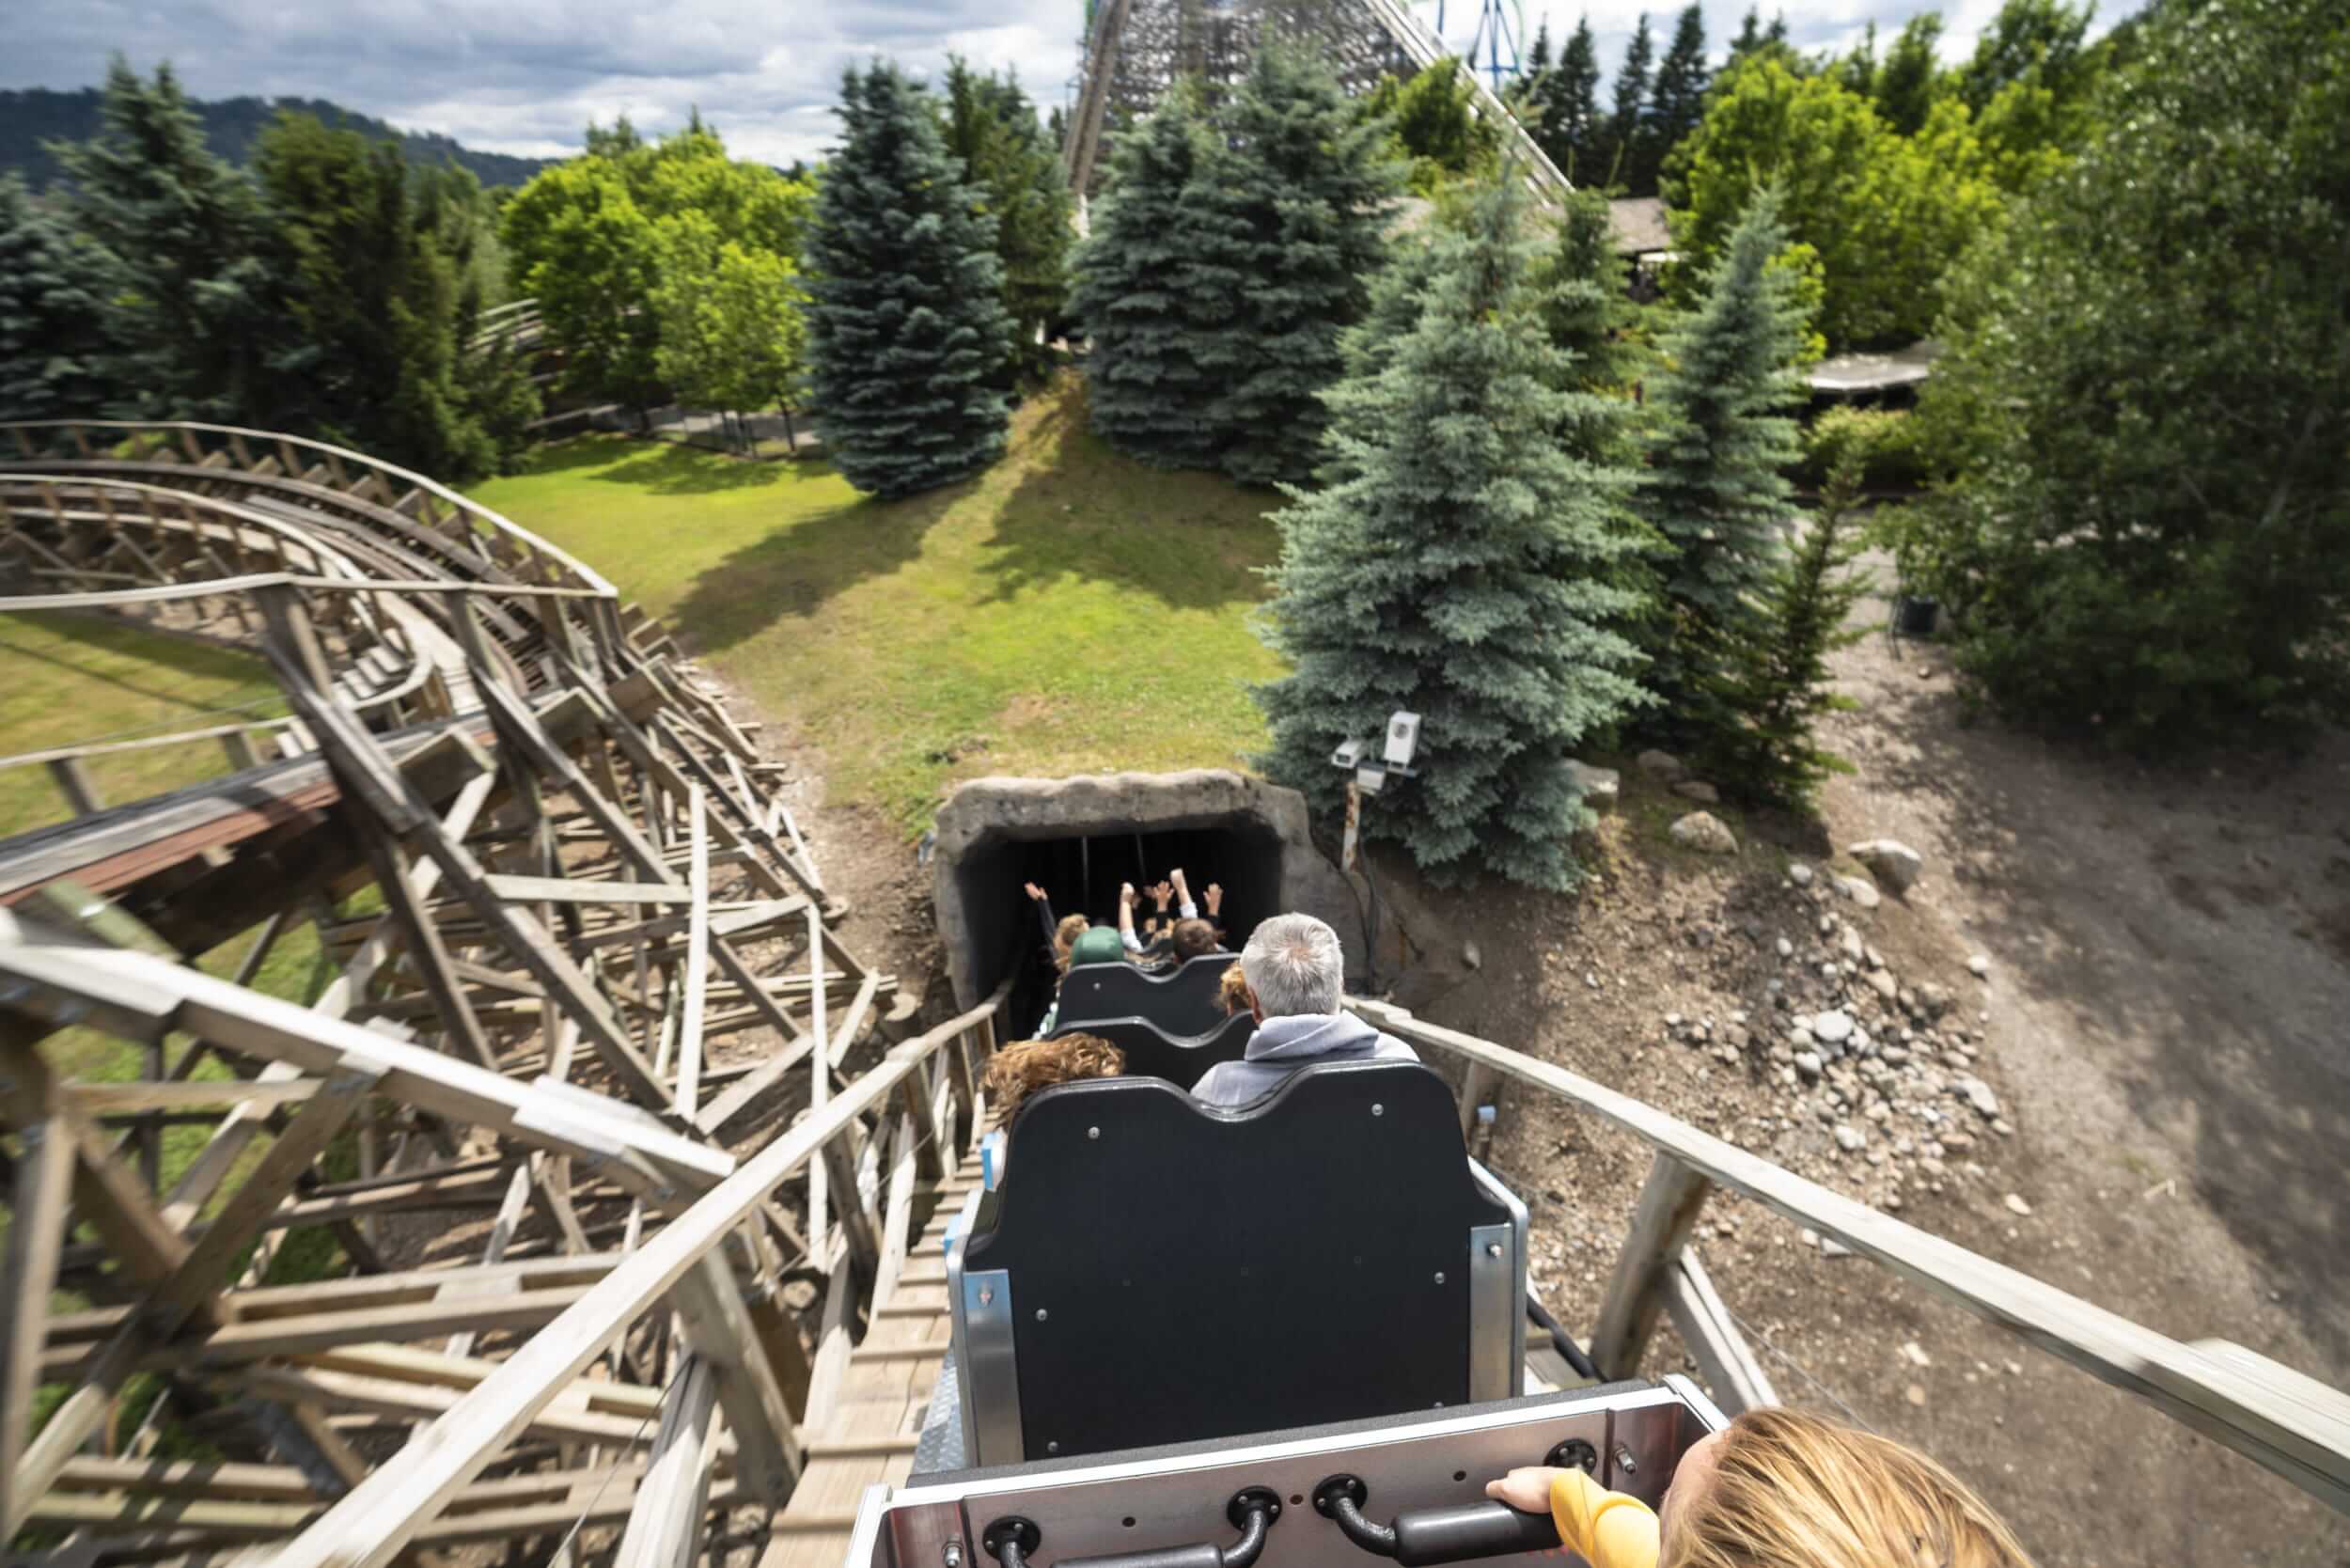 Visitors riding a wooden roller coaster at Silverwood Theme Park